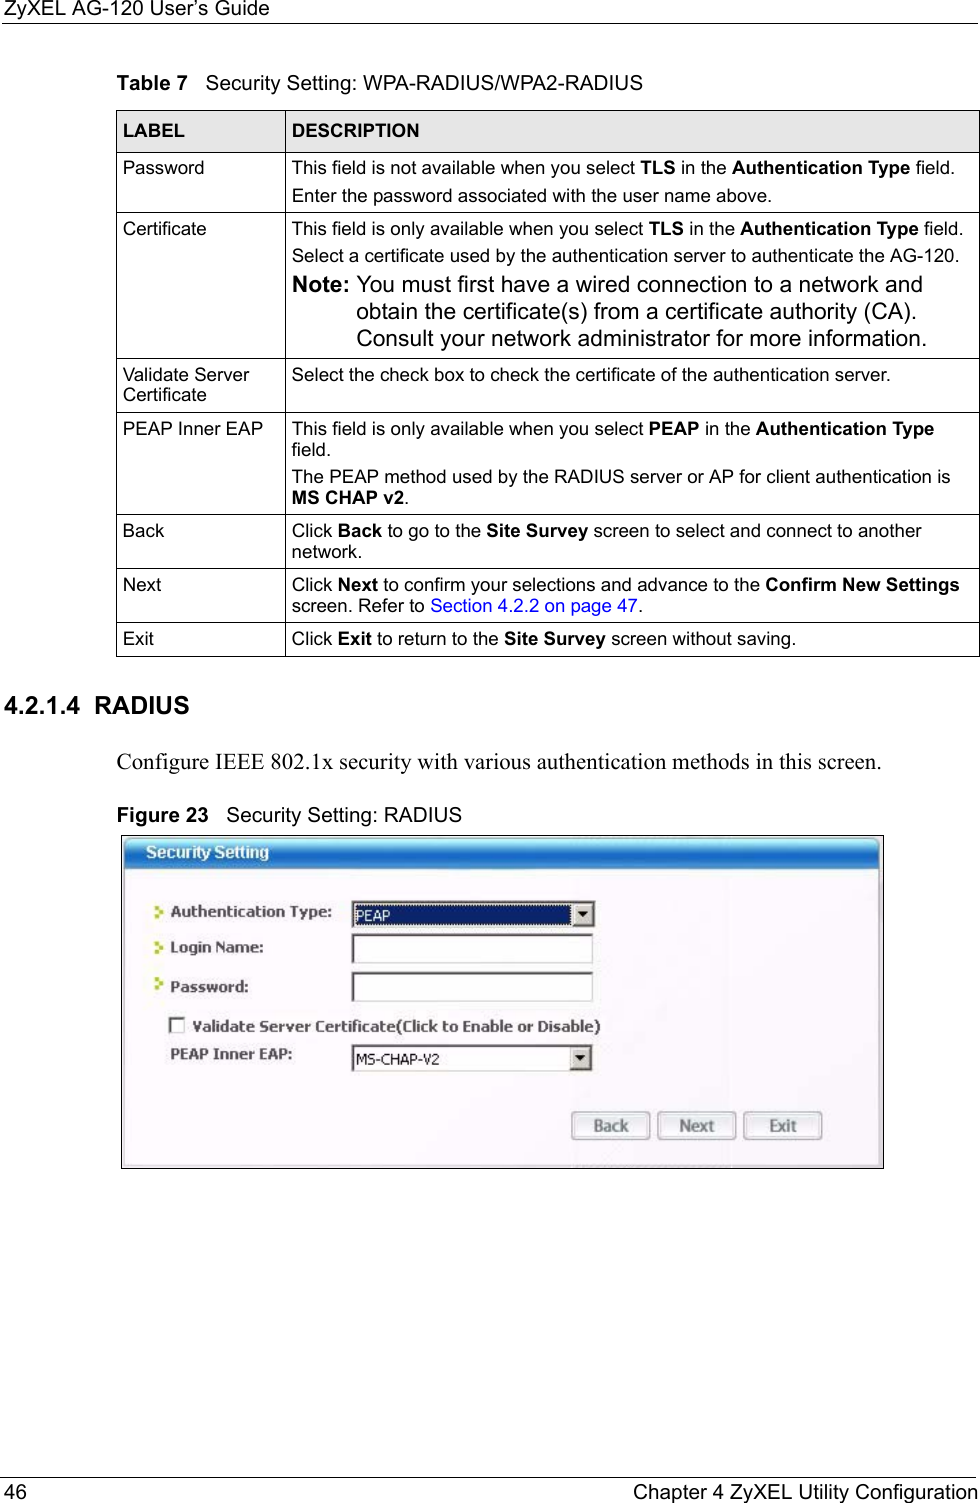 ZyXEL AG-120 User’s Guide46 Chapter 4 ZyXEL Utility Configuration4.2.1.4  RADIUSConfigure IEEE 802.1x security with various authentication methods in this screen. Figure 23   Security Setting: RADIUS Password This field is not available when you select TLS in the Authentication Type field. Enter the password associated with the user name above. Certificate This field is only available when you select TLS in the Authentication Type field. Select a certificate used by the authentication server to authenticate the AG-120.Note: You must first have a wired connection to a network and obtain the certificate(s) from a certificate authority (CA). Consult your network administrator for more information.Validate Server CertificateSelect the check box to check the certificate of the authentication server.PEAP Inner EAP This field is only available when you select PEAP in the Authentication Type field.The PEAP method used by the RADIUS server or AP for client authentication is MS CHAP v2.Back Click Back to go to the Site Survey screen to select and connect to another network.Next Click Next to confirm your selections and advance to the Confirm New Settings screen. Refer to Section 4.2.2 on page 47. Exit Click Exit to return to the Site Survey screen without saving.Table 7   Security Setting: WPA-RADIUS/WPA2-RADIUSLABEL DESCRIPTION